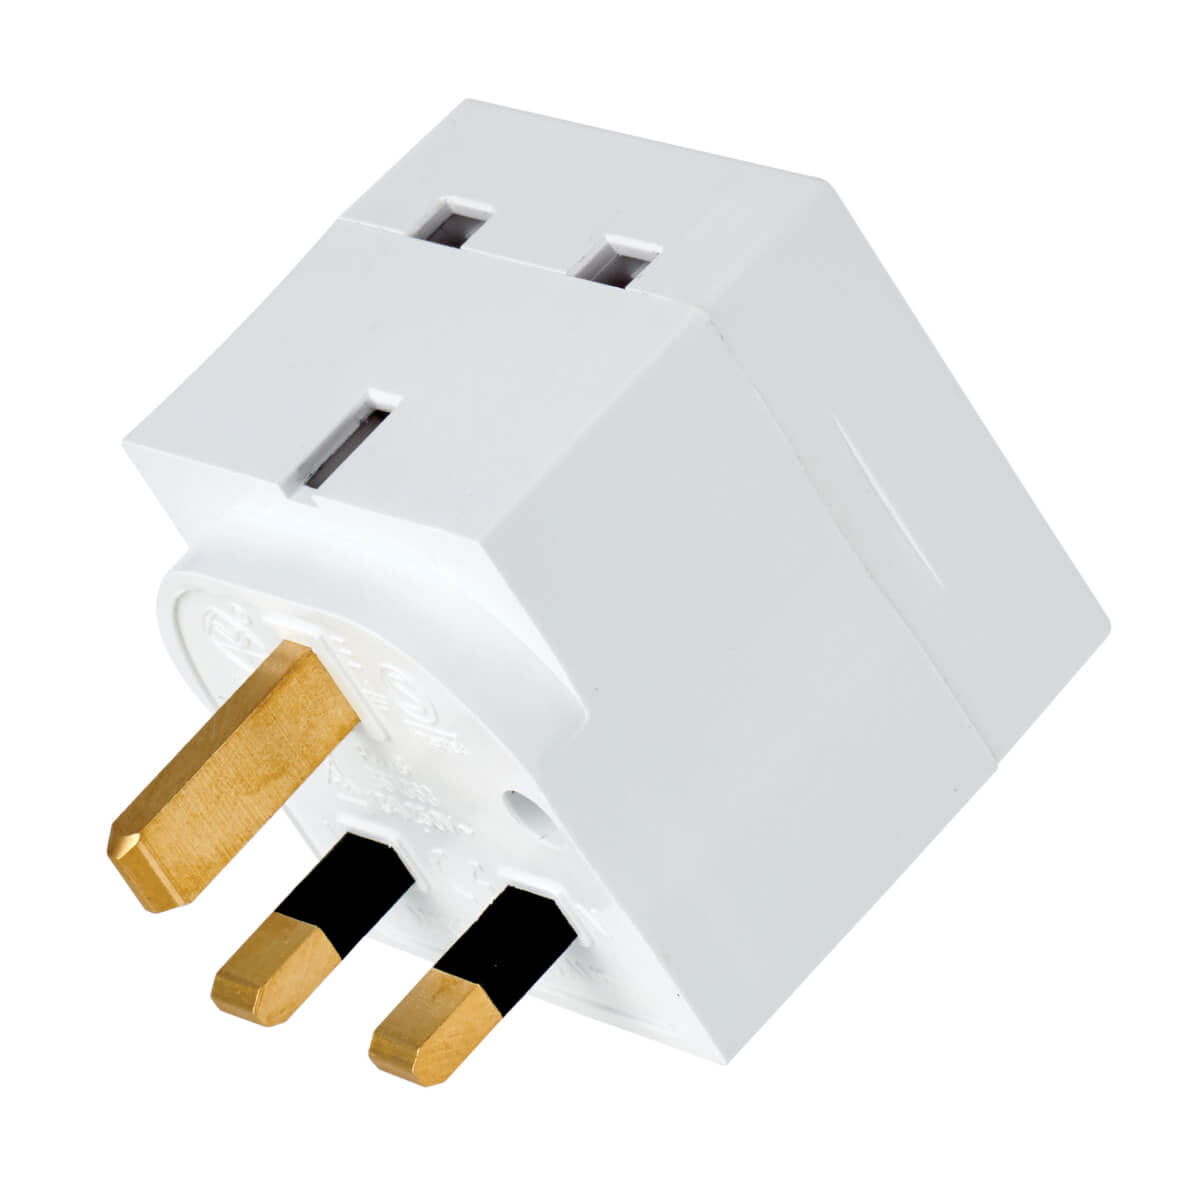 PS1B 2-Outlet Power Strip - British BS1363A Outlets